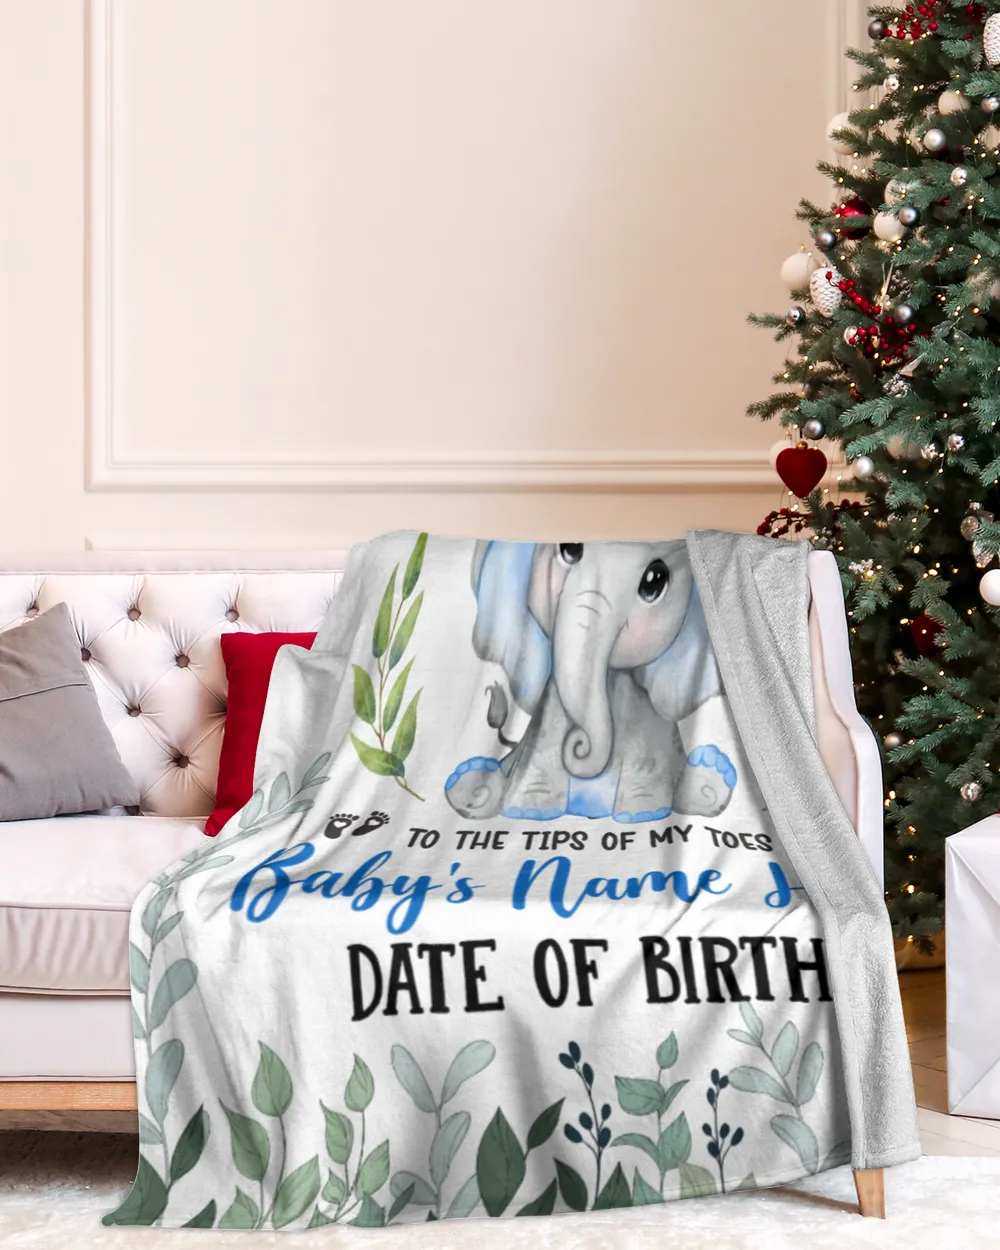 Personalized Name and Date  Cute Baby Elephant boy ,  Gift  for Newmom, Baby Shower Gifts